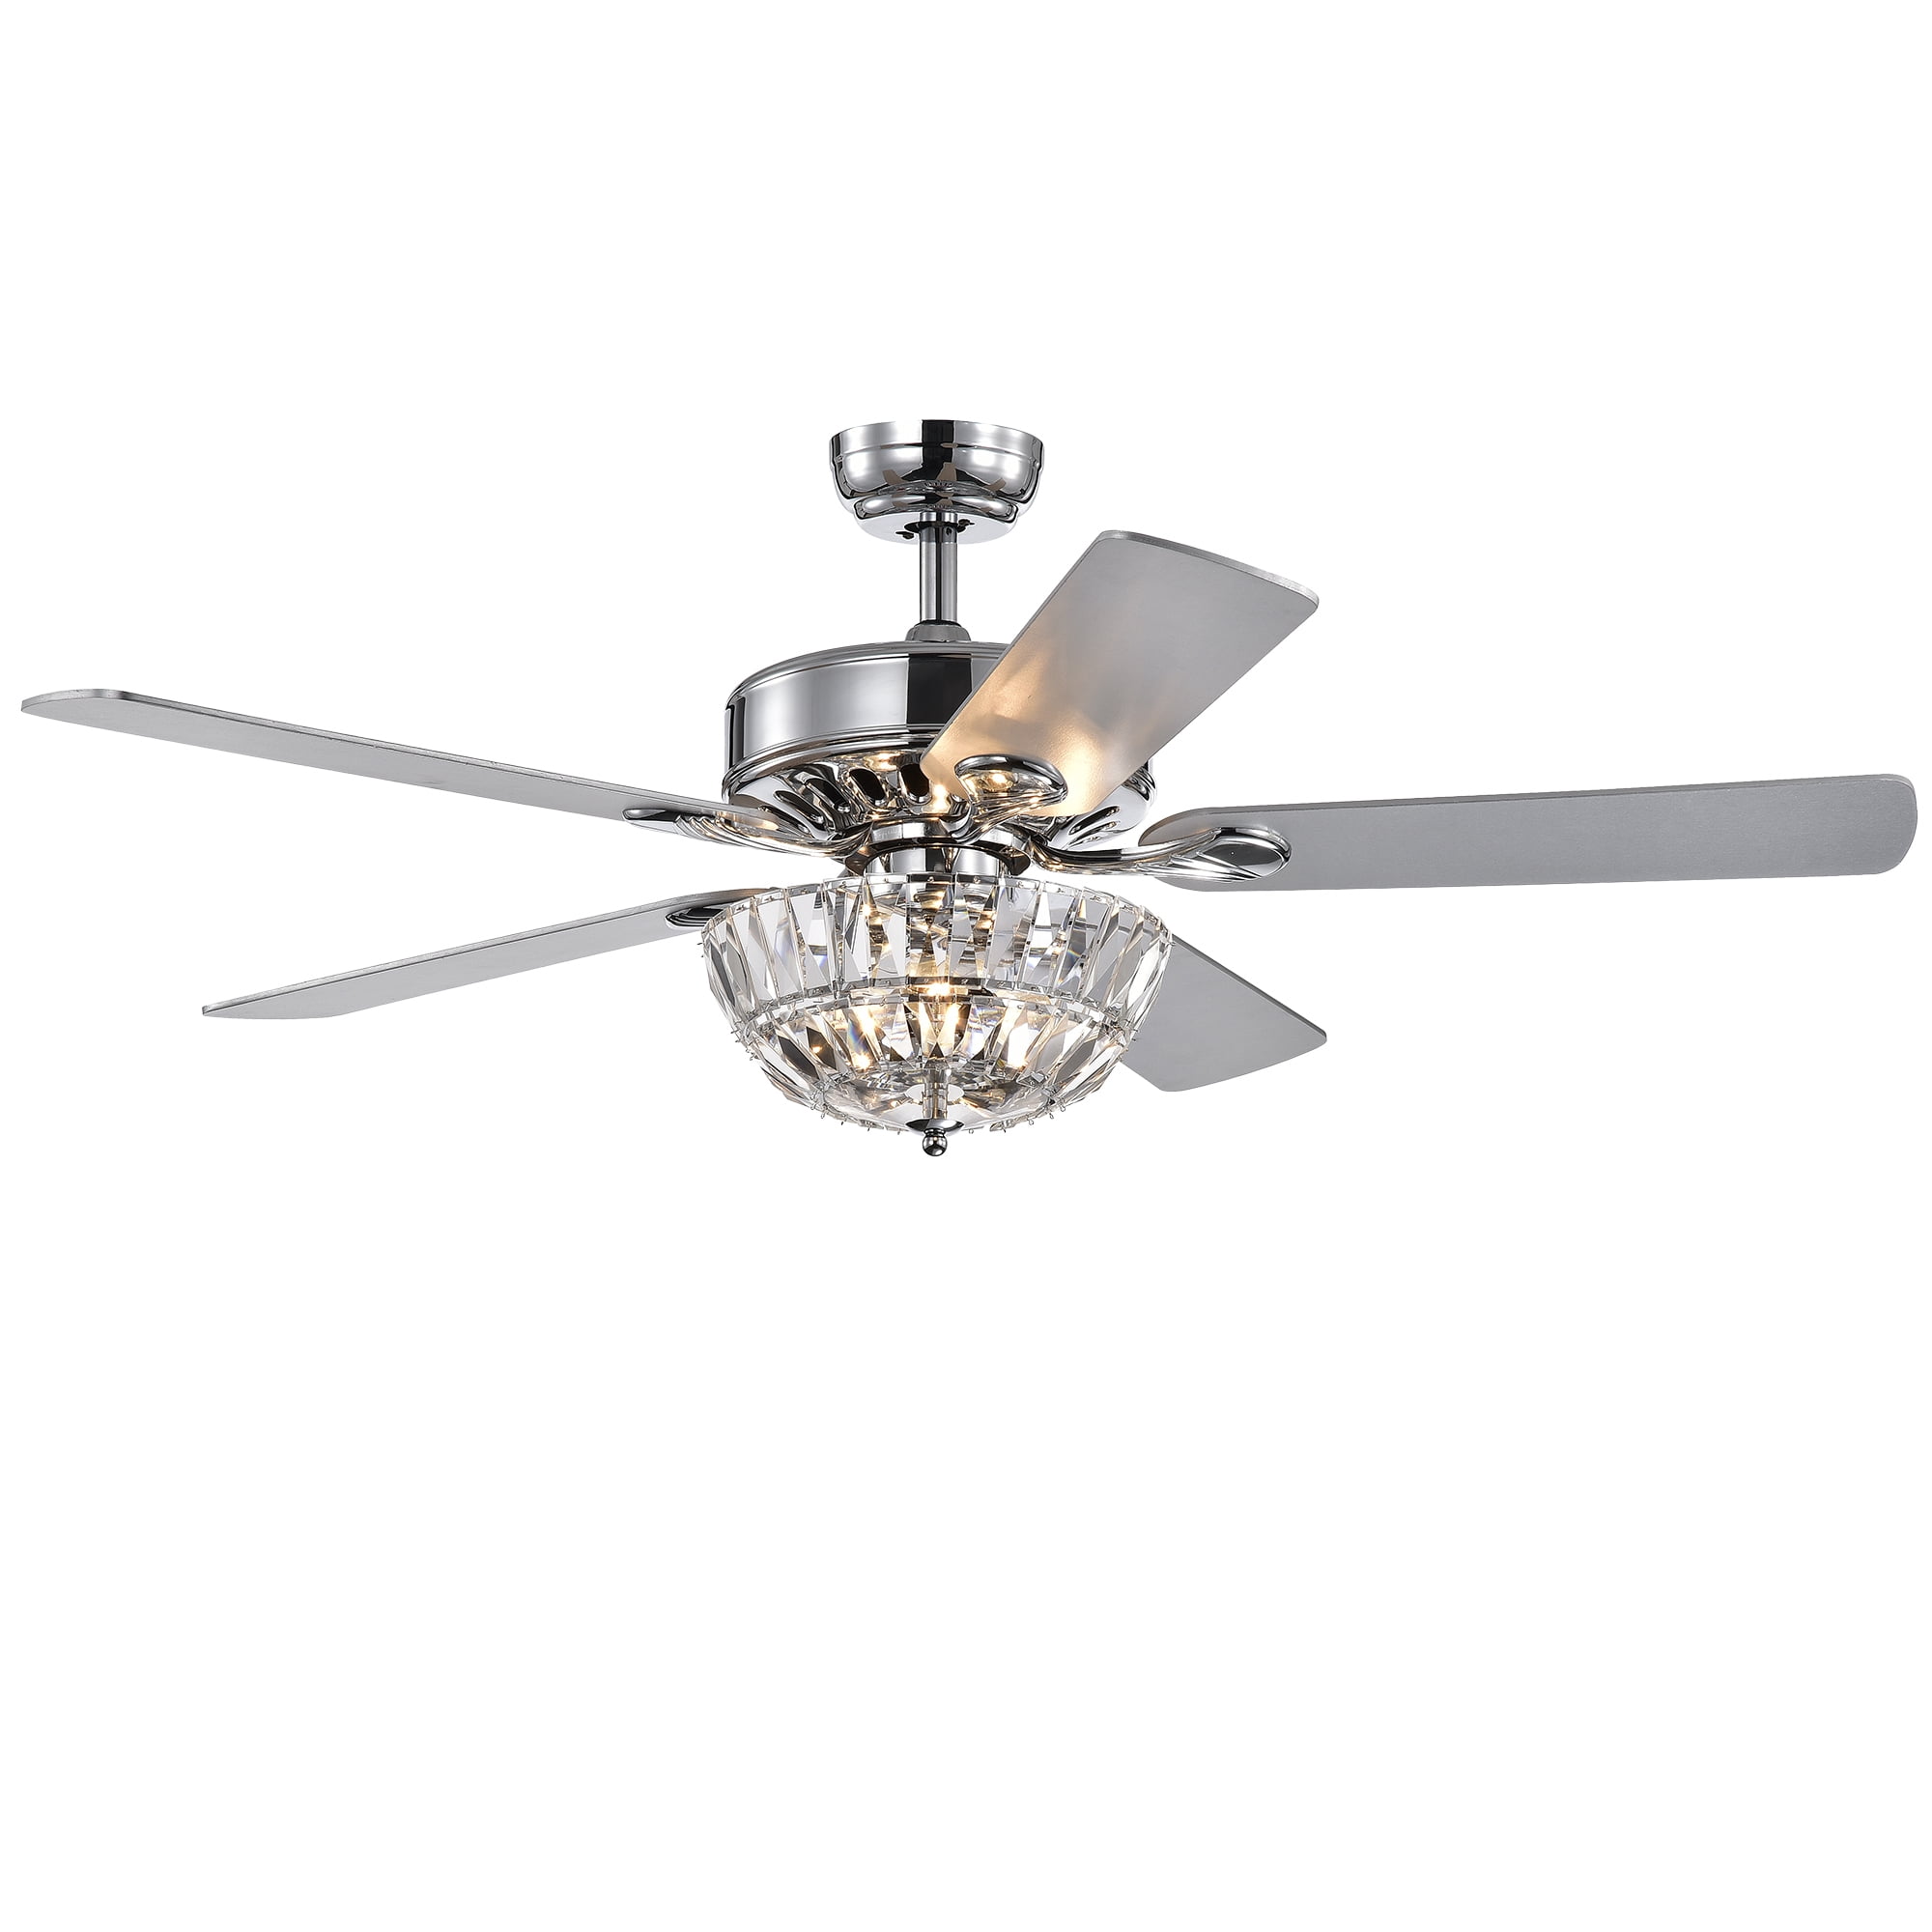 Senma 52-inch 3-light Lighted Ceiling Fan with Crystal Bowl Shade (incl. Remote & 2 Color Option Blades)